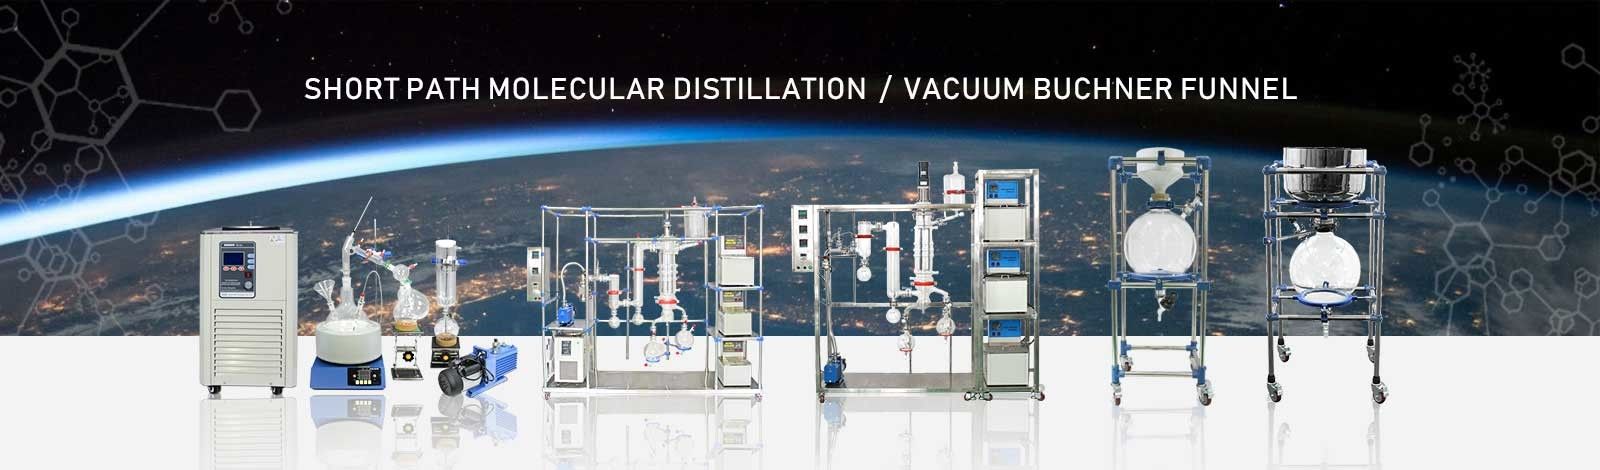 Chemical Glass Reactor